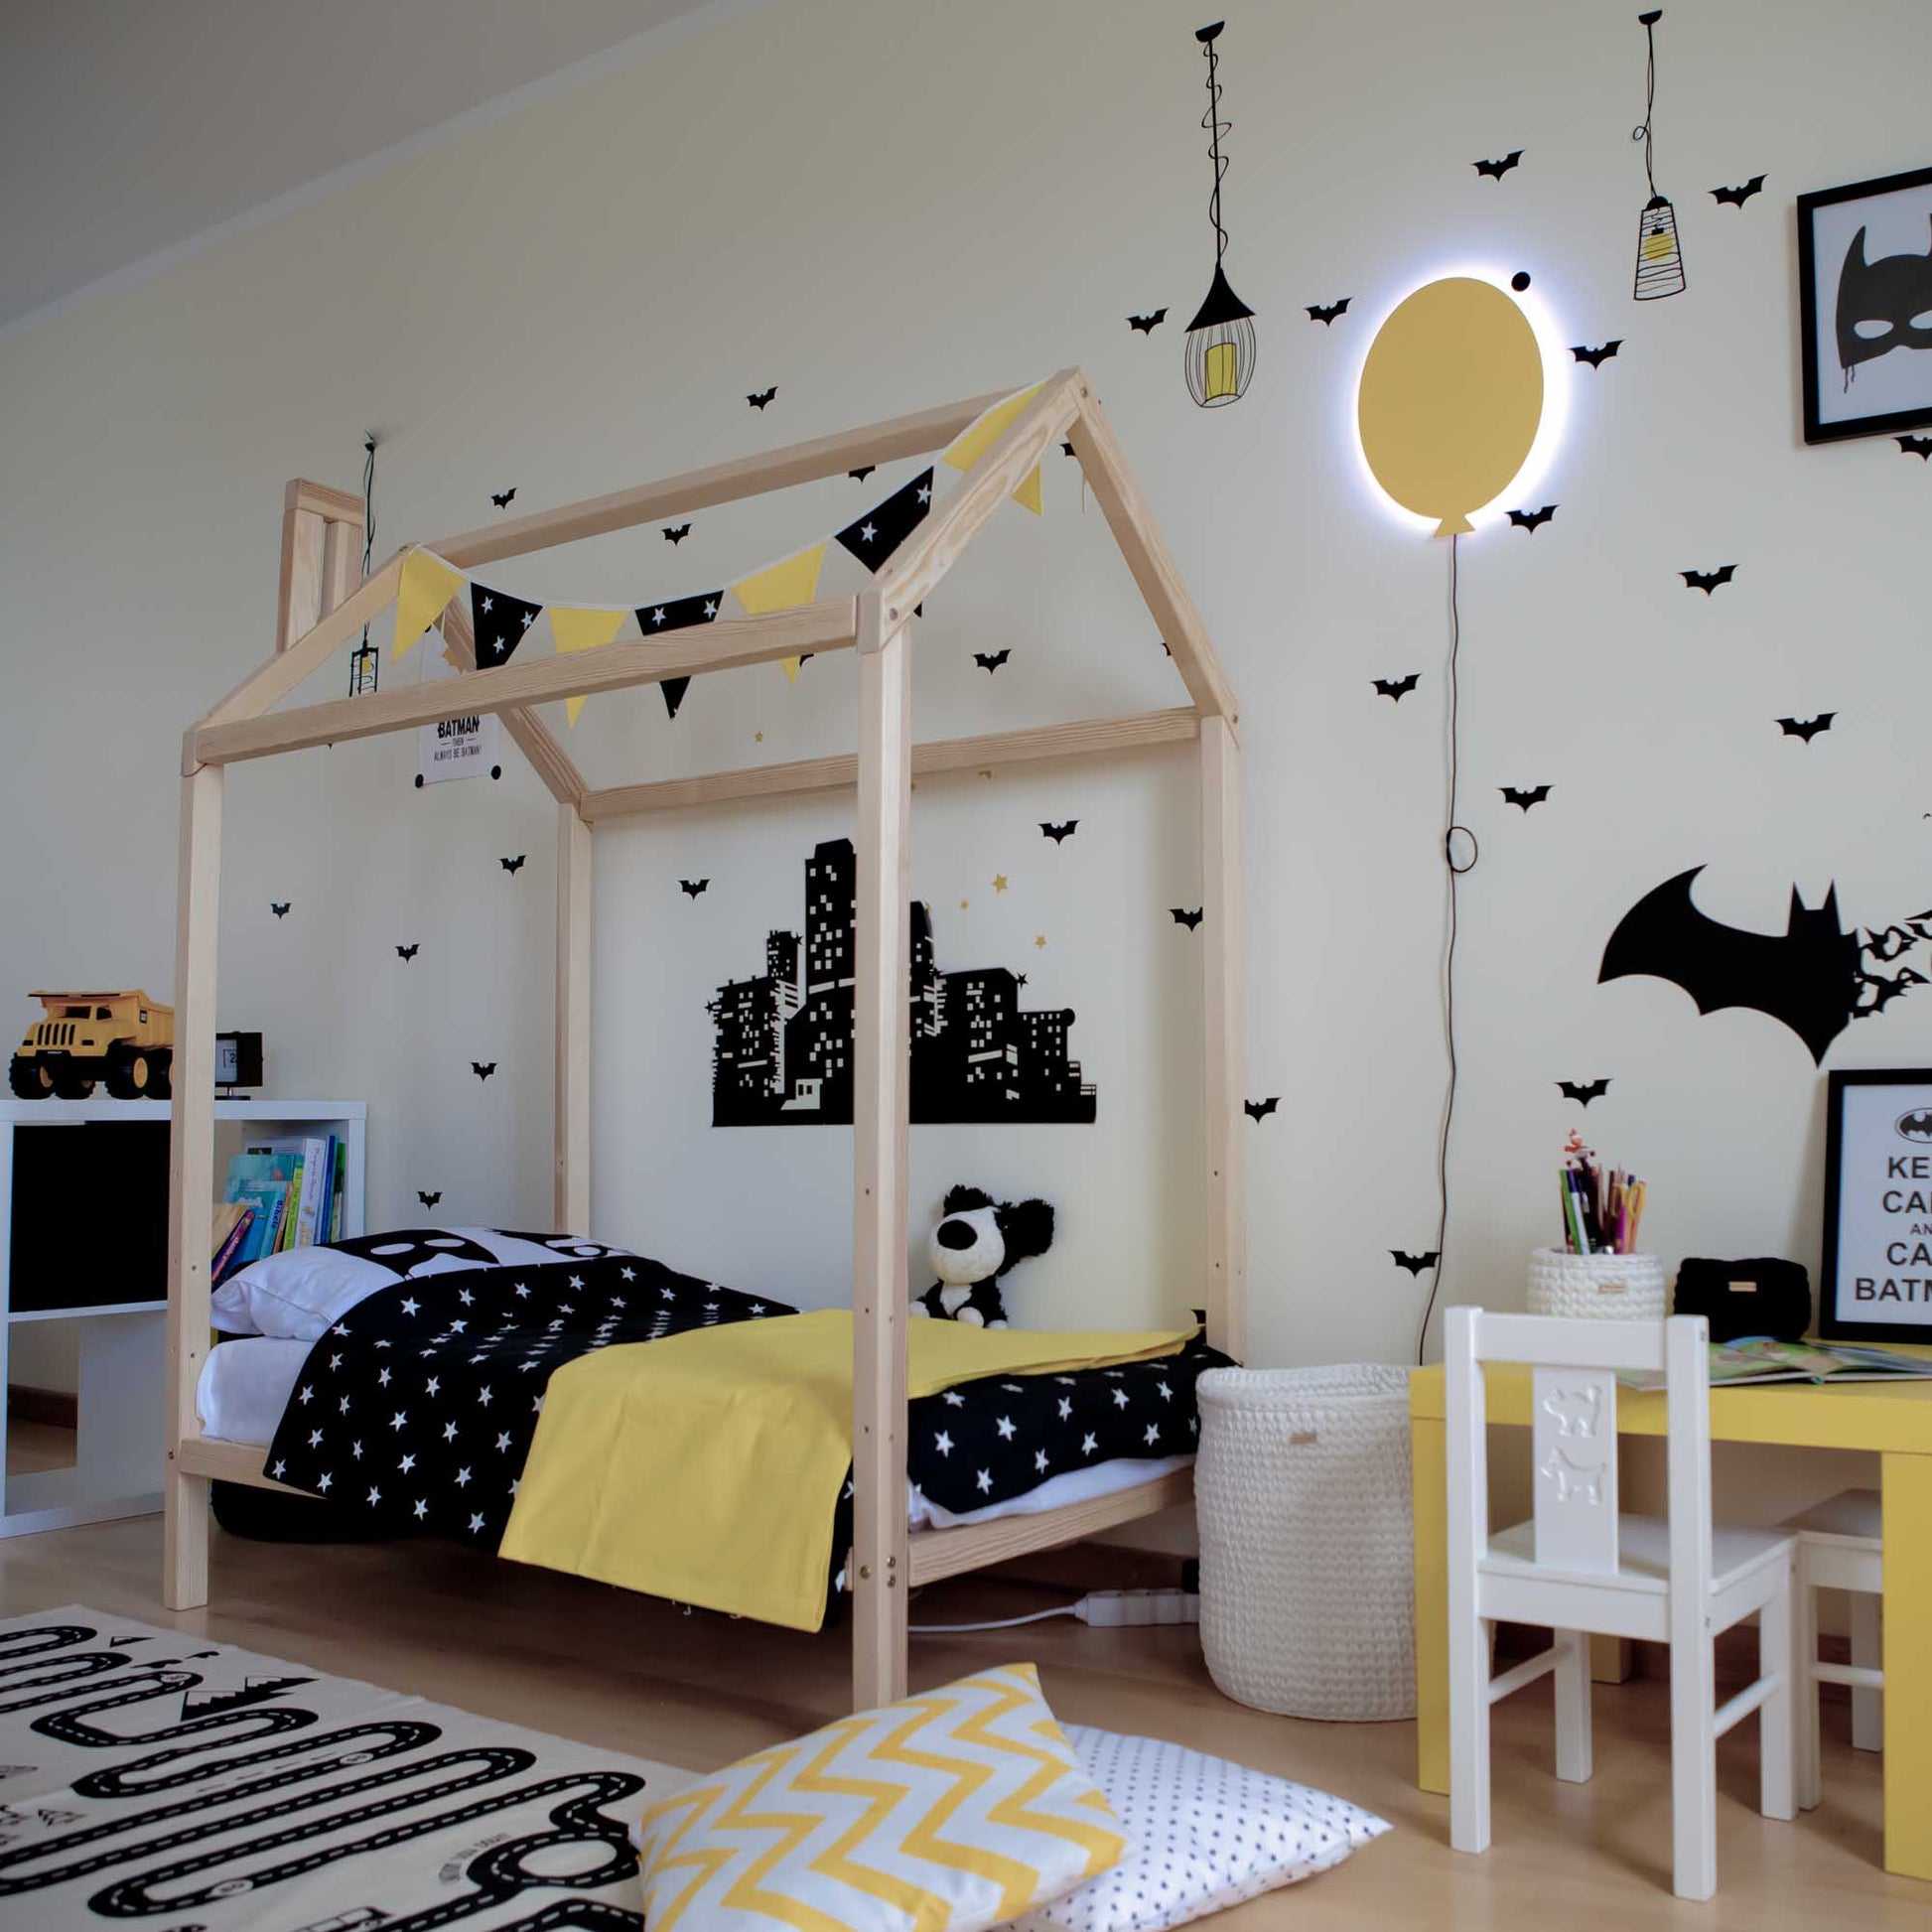 A black and yellow bedroom with a raised wooden house bed on legs.